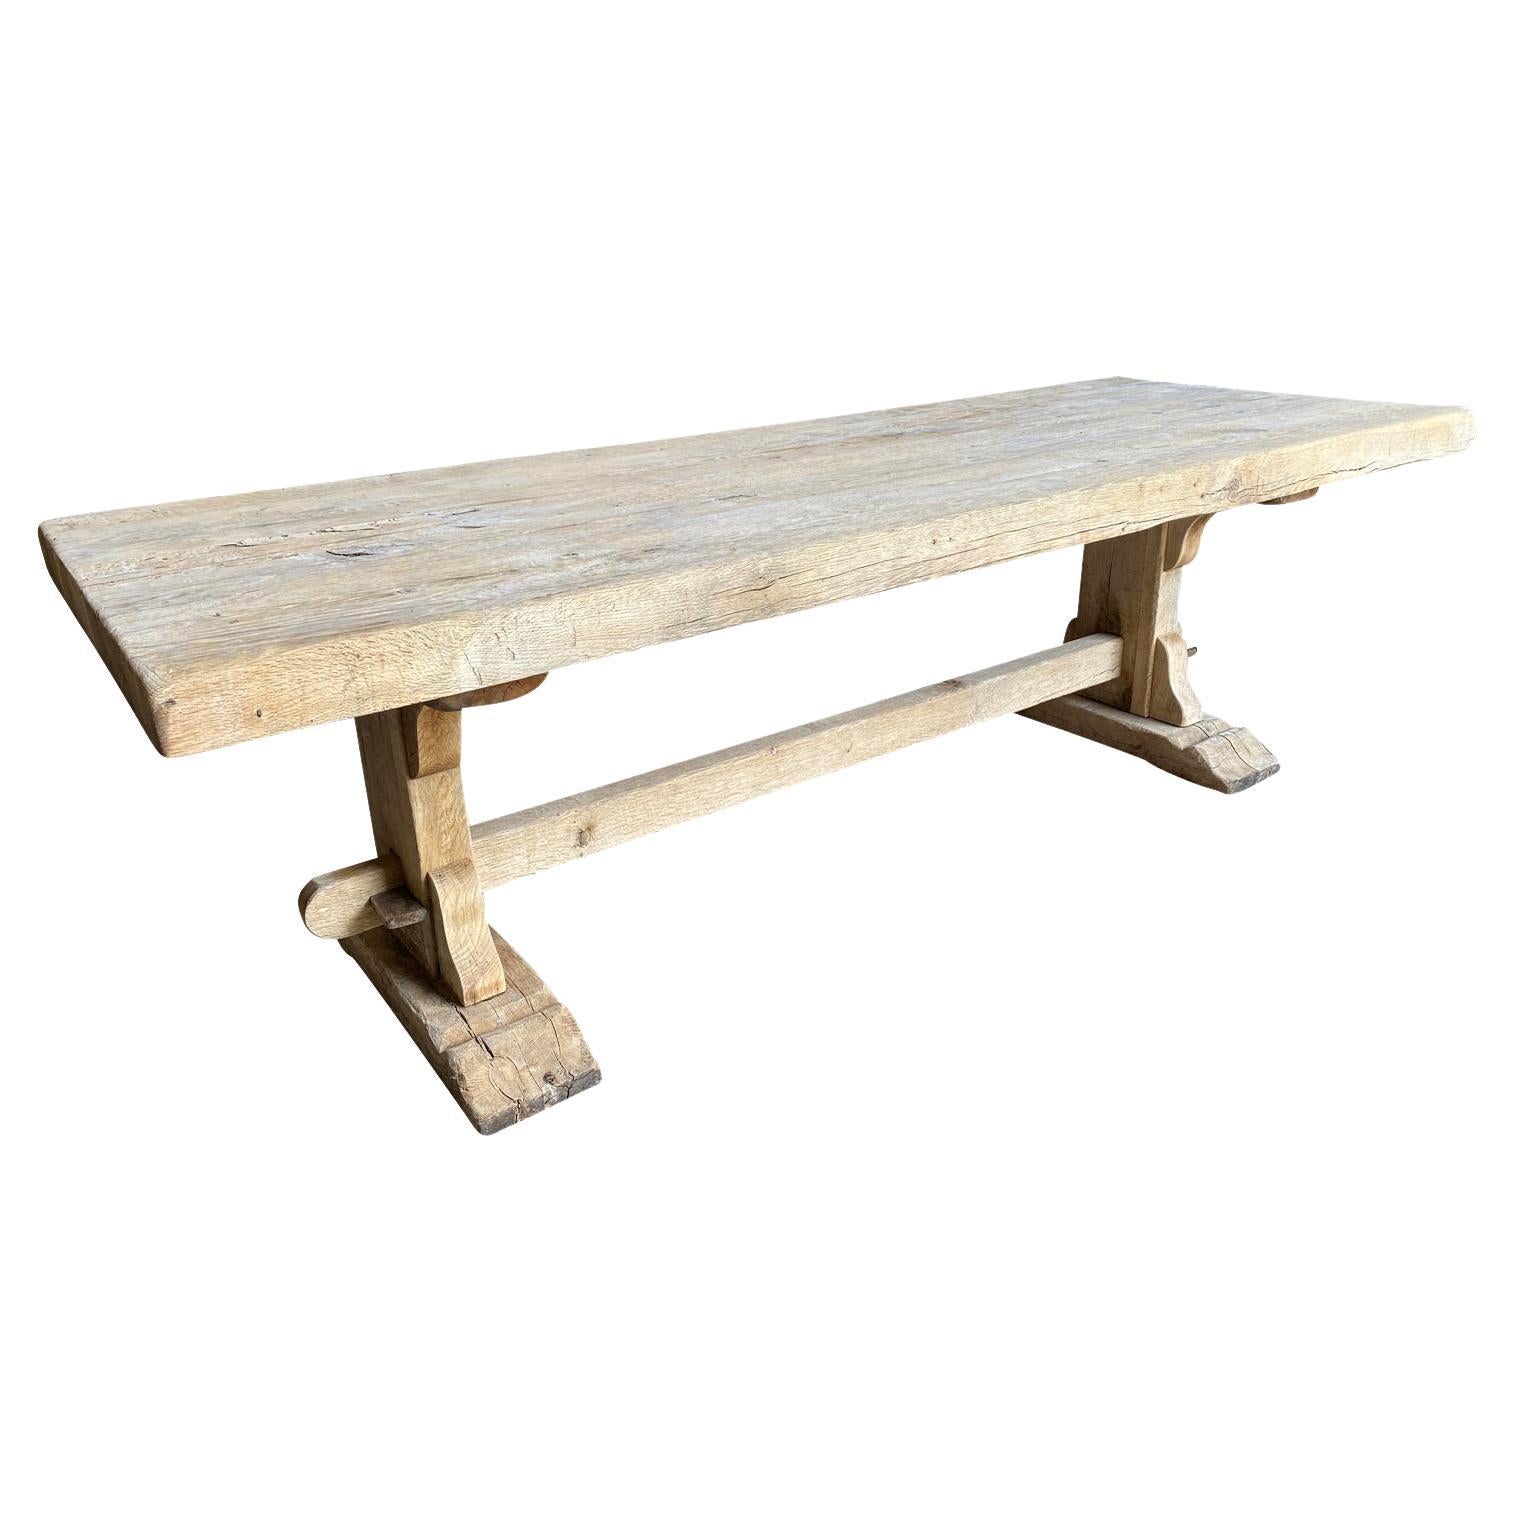 19th Century French Farm Table, Trestle Table